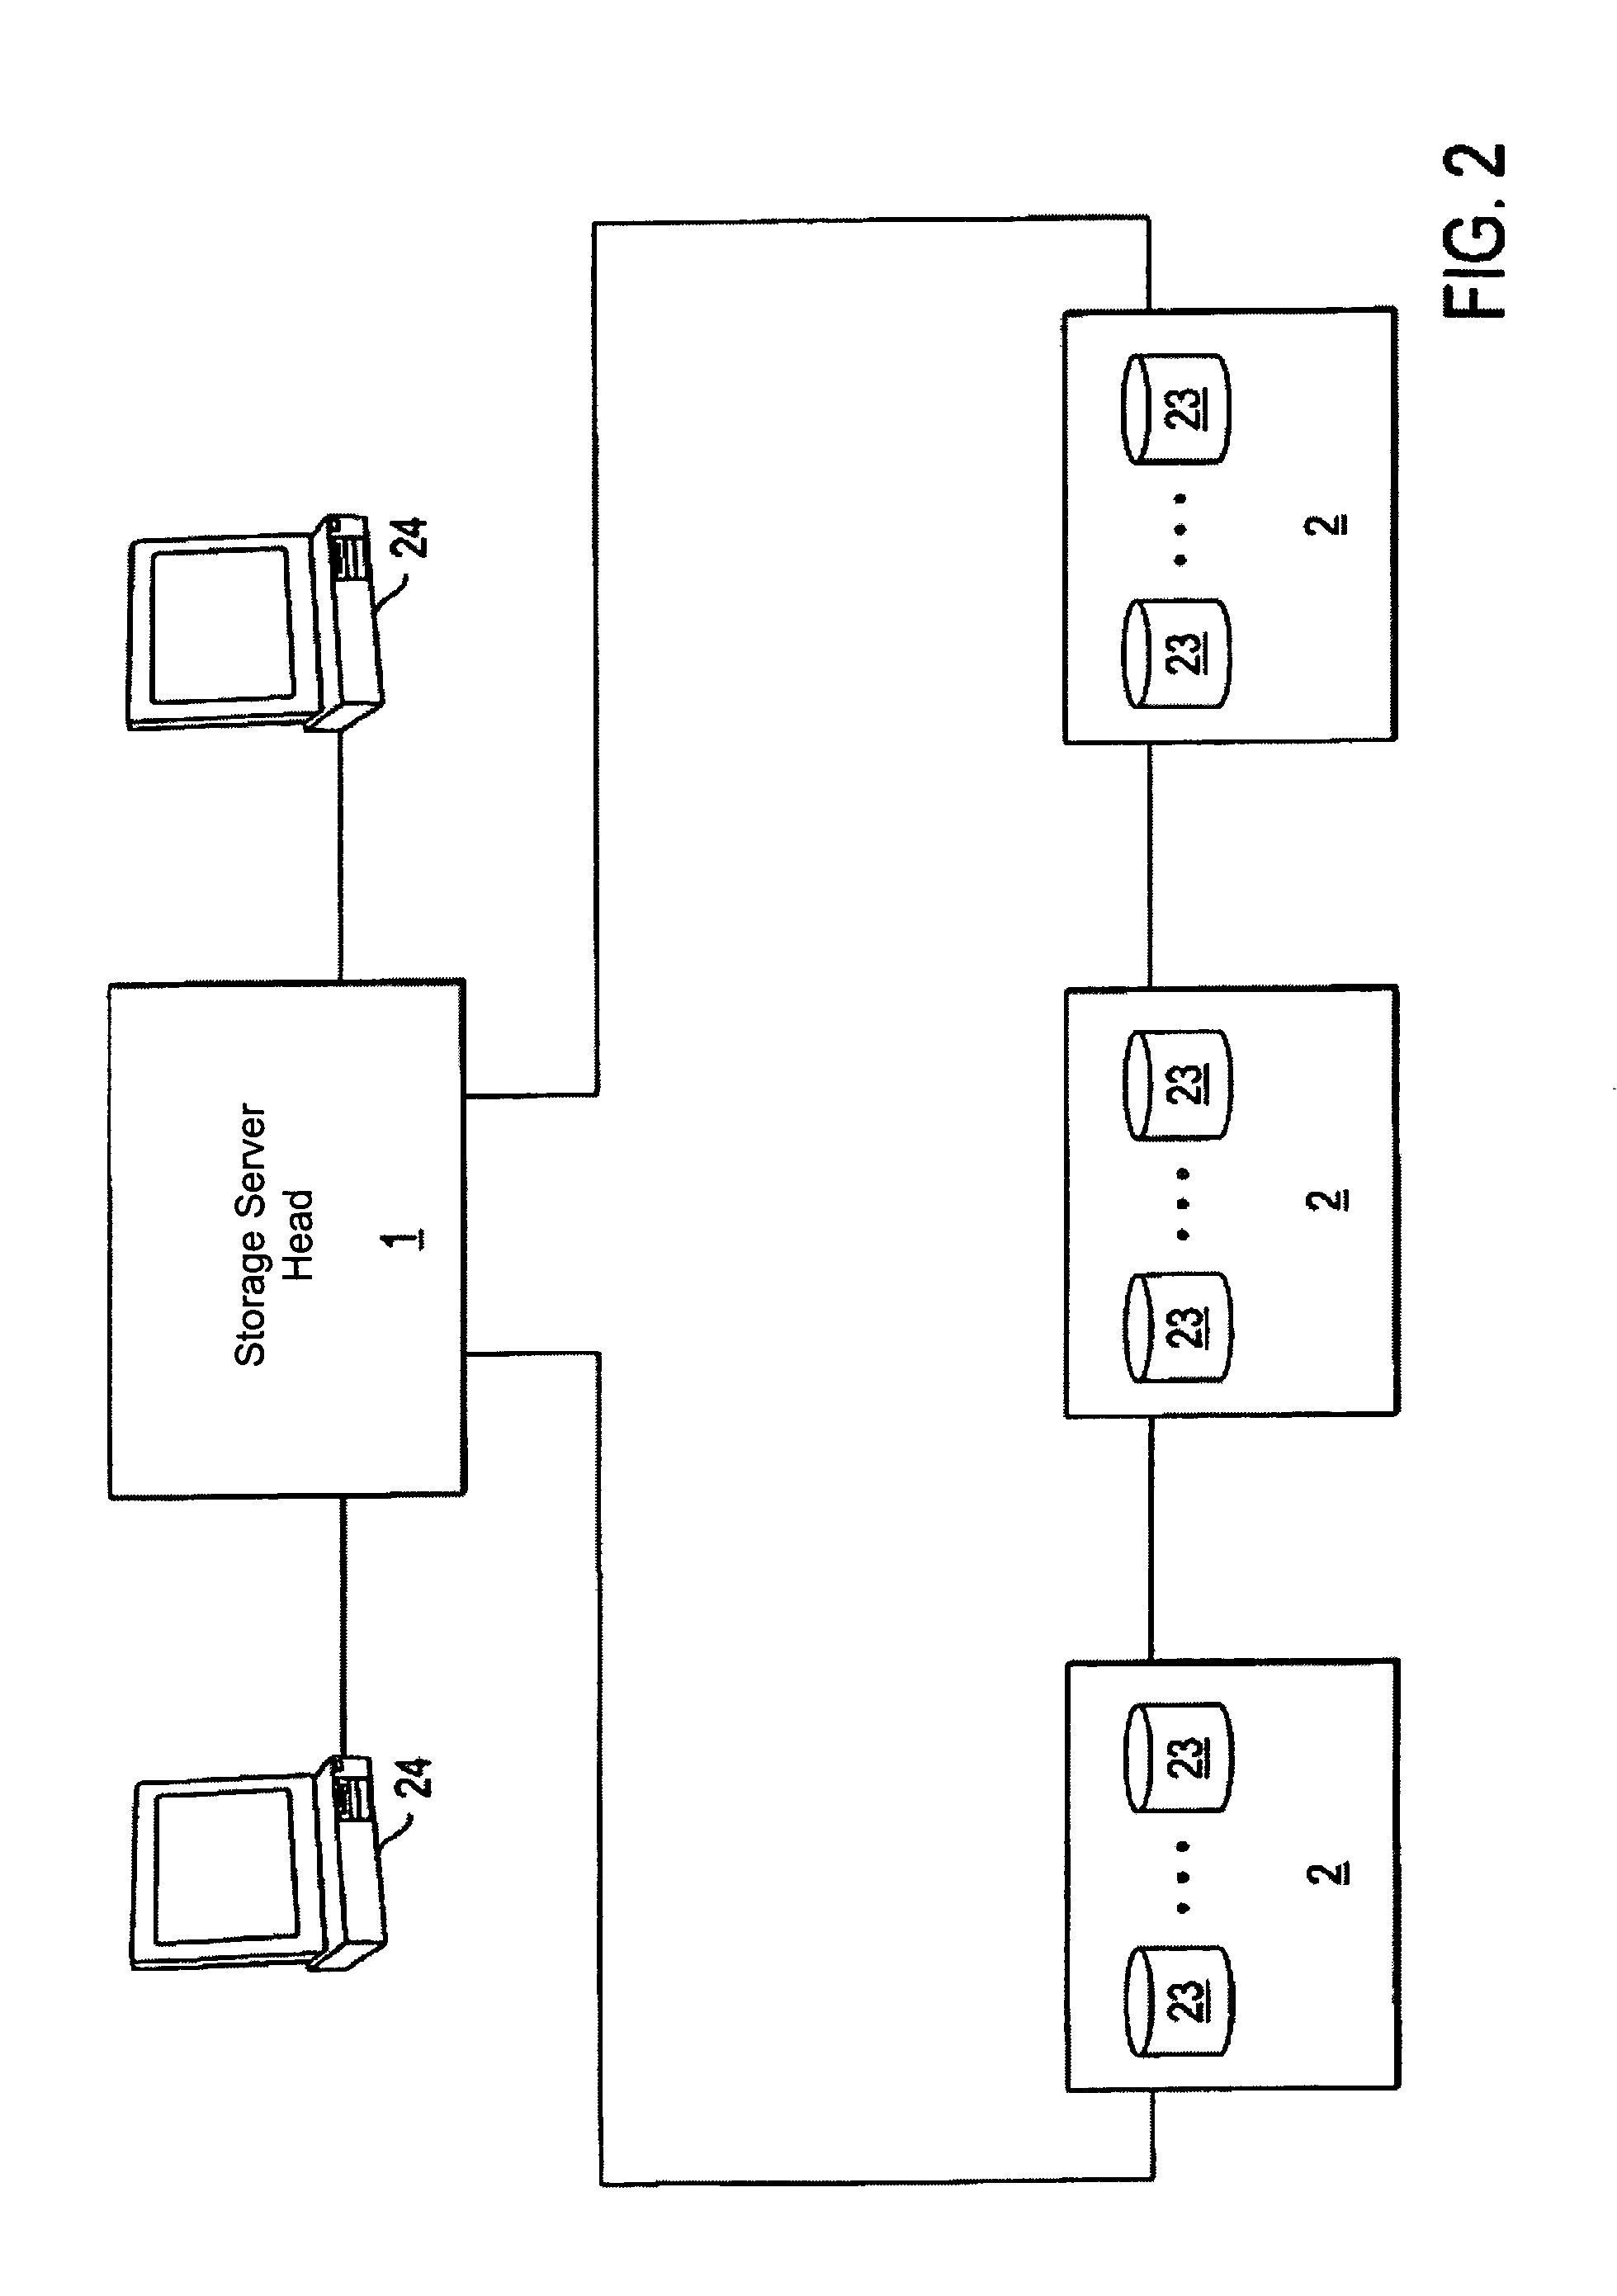 Method and system for reliable access of expander state information in highly available storage devices